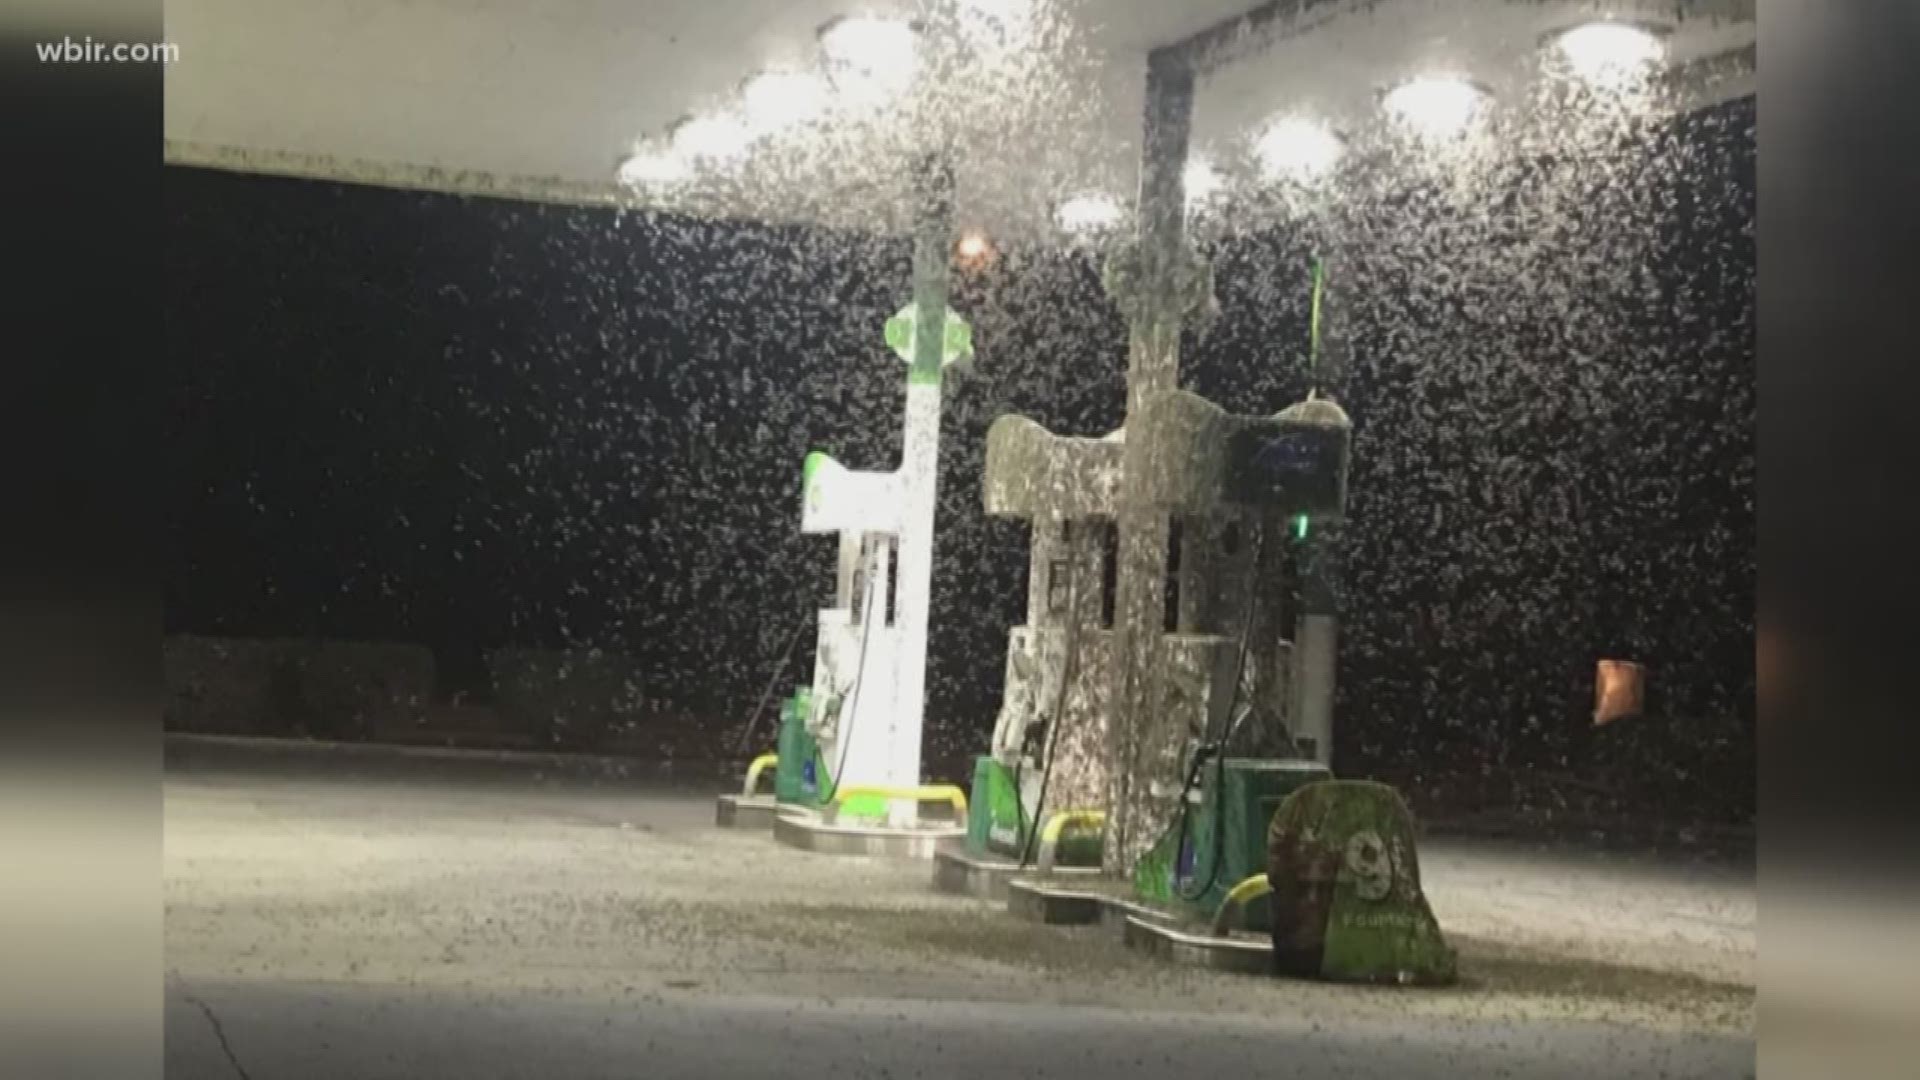 Thousands of the insects covered almost every inch of the BP gas station on West Main Street Monday night.